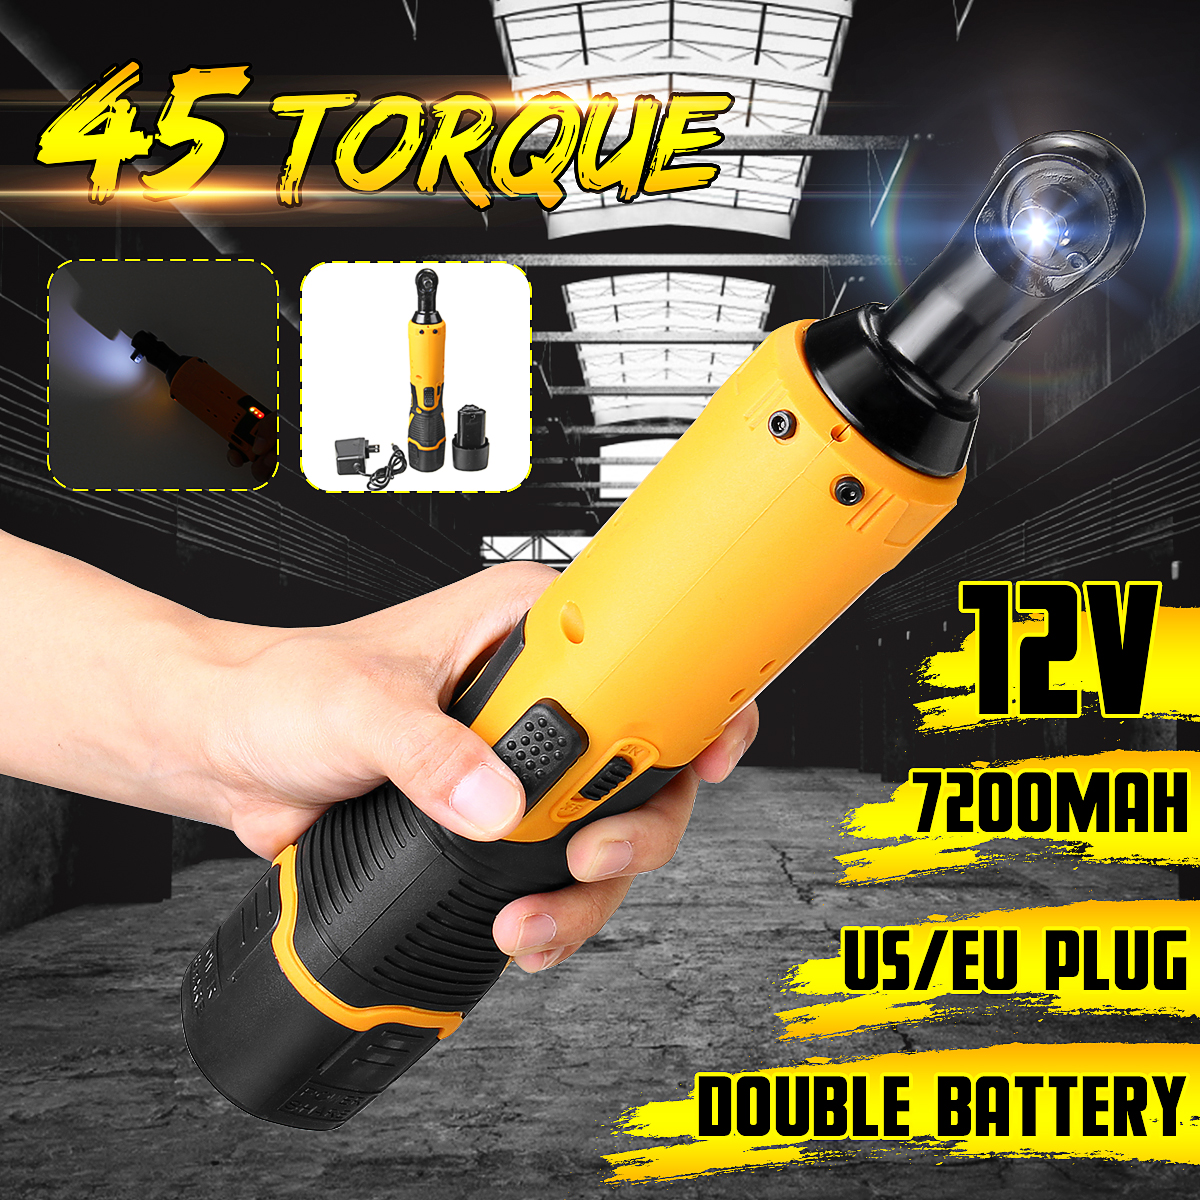 7200mah-Power-Cordless-Ratchet-Wrench-38quot-12V-Li-ion-Electric-Wrench-Max-Torque-45-Compact-Size-1560566-1